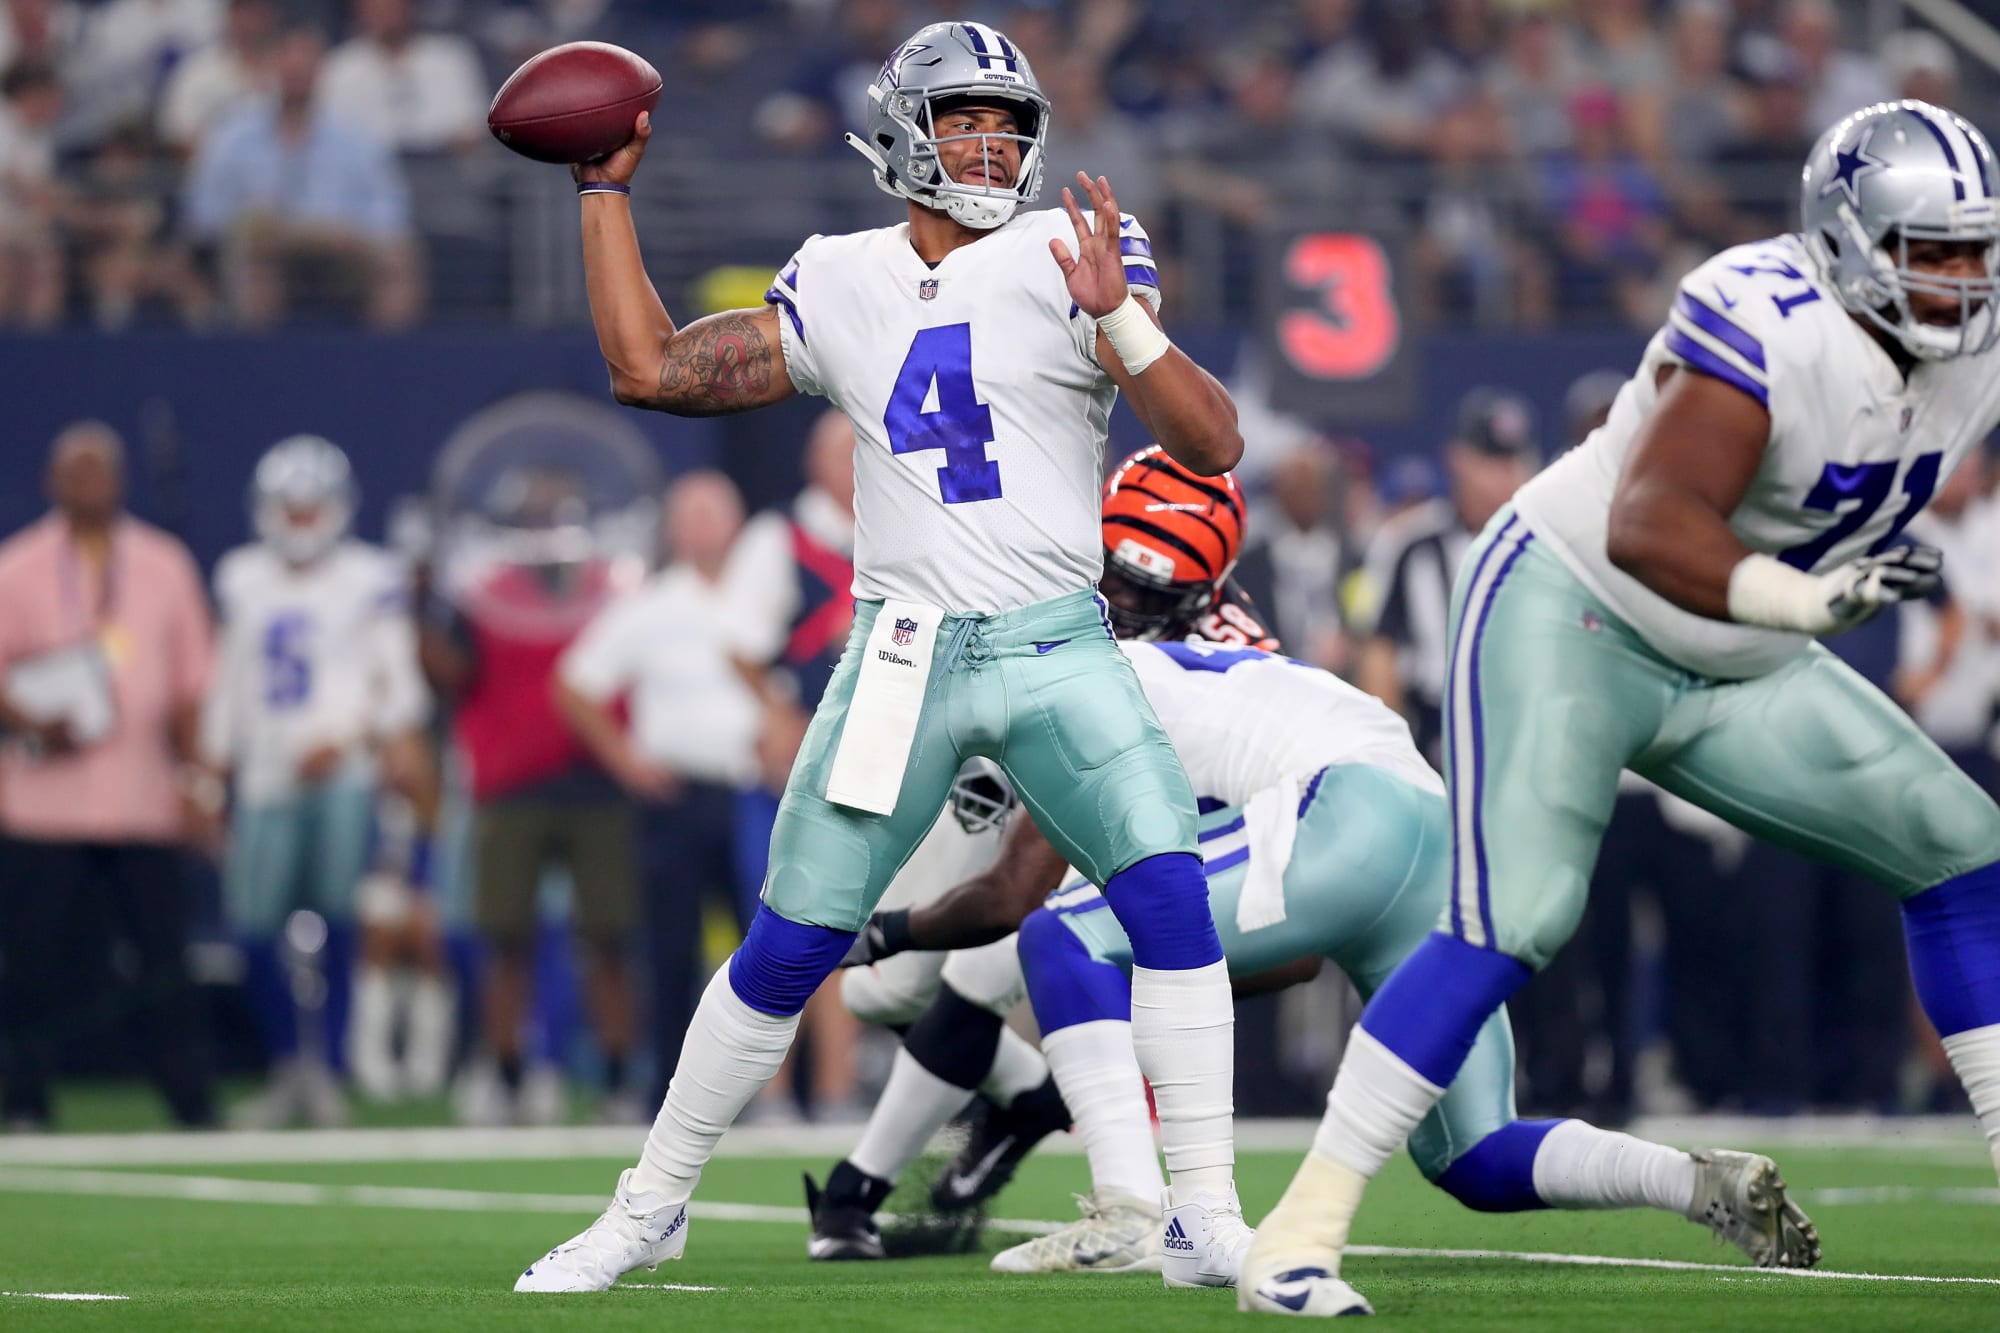 Why Dak Prescott must be fully trusted from here on out